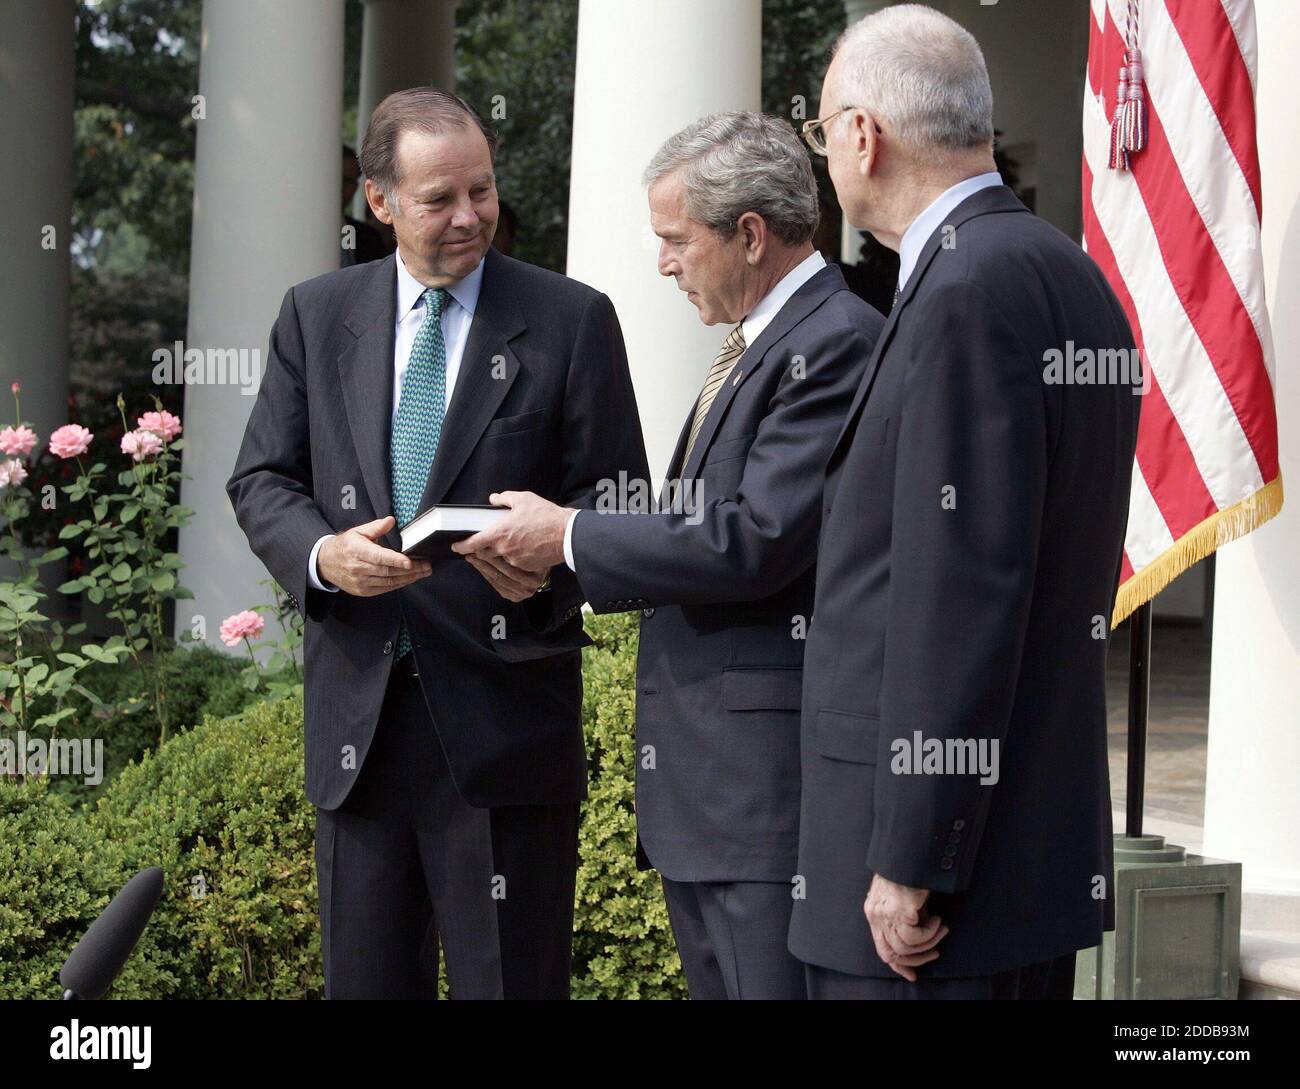 NO FILM, NO VIDEO, NO TV, NO DOCUMENTARY - President George W. Bush receives the 9/11 Commission final report from 9/11 Commission Chairman Thomas H. Kean (l) and Vice Chairman Lee H. Hamilton in the Rose Garden of the White House in Washington, D.C., on July 22, 2004. The commission's report detailed 'deep institutional failings' and missed opportunities by both the Bush and Clinton administrations to thwart the terrorist hijackings on September 11, 2001. Photo by Chuck Kennedy/KRT/ABACA Stock Photo